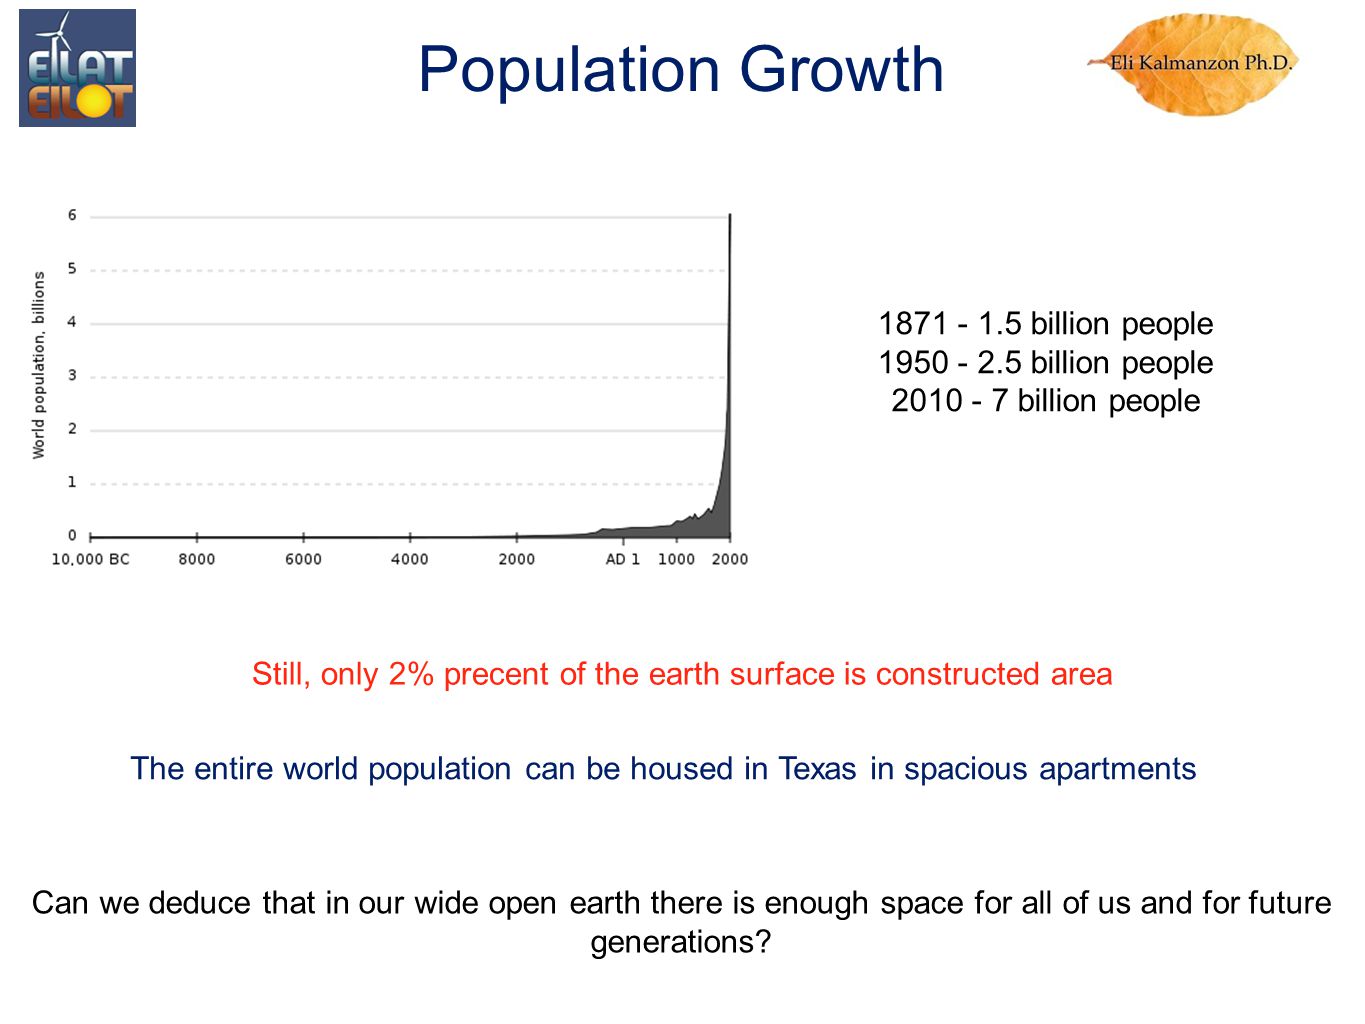 Population Growth billion people billion people billion people Still, only 2% precent of the earth surface is constructed area The entire world population can be housed in Texas in spacious apartments Can we deduce that in our wide open earth there is enough space for all of us and for future generations